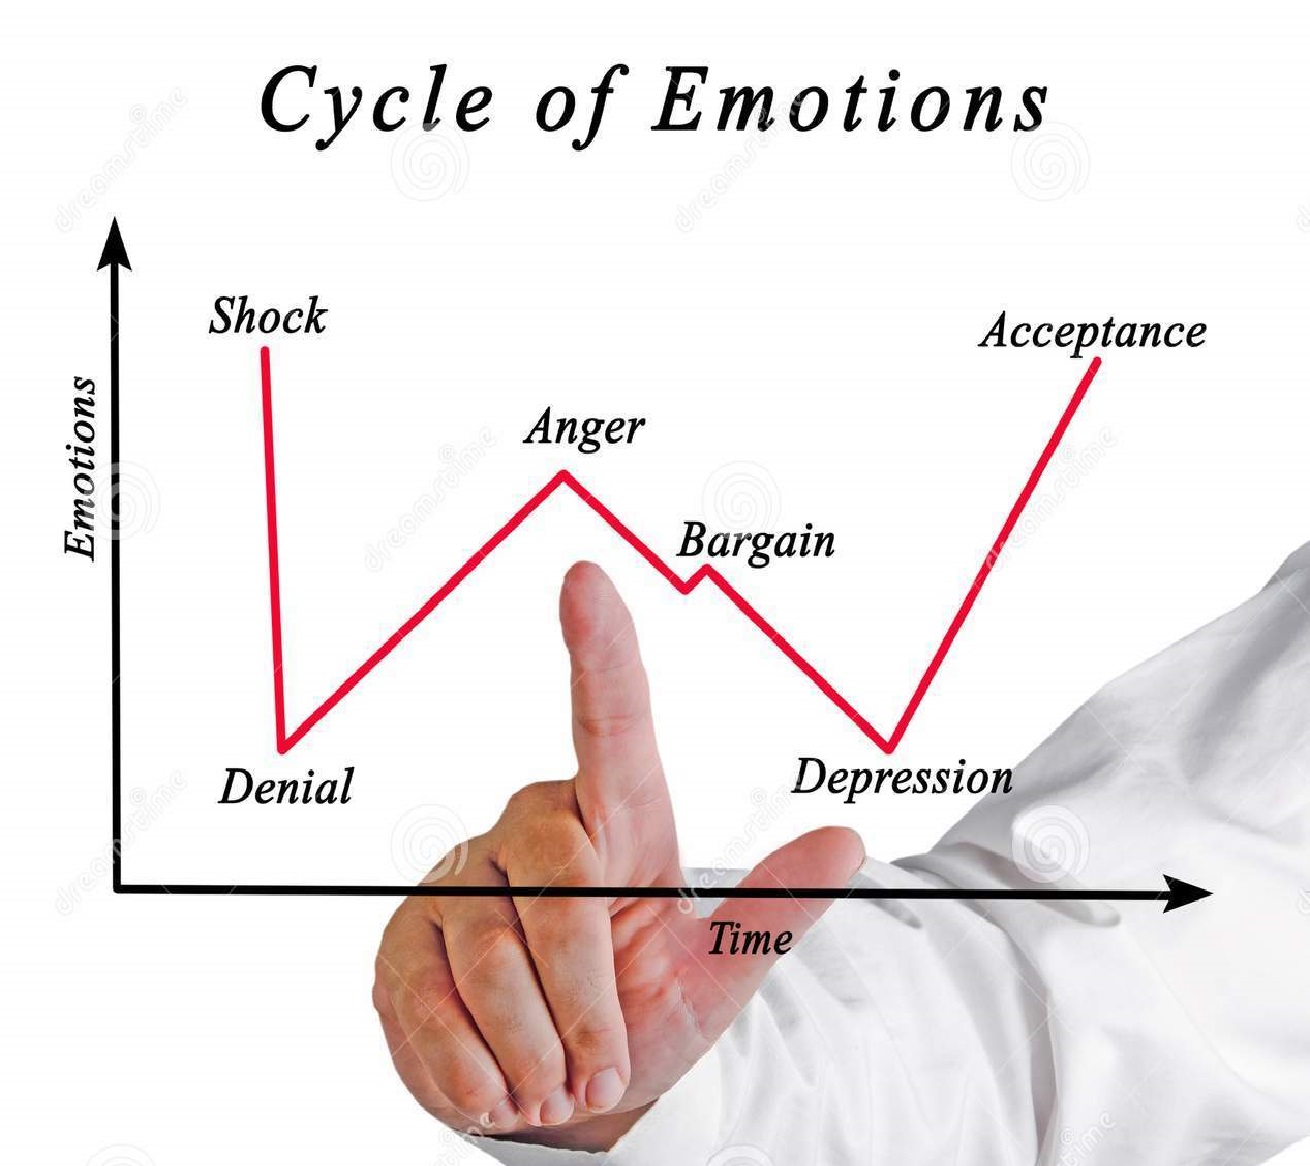 Why Emotions are so Important to Systemic Change